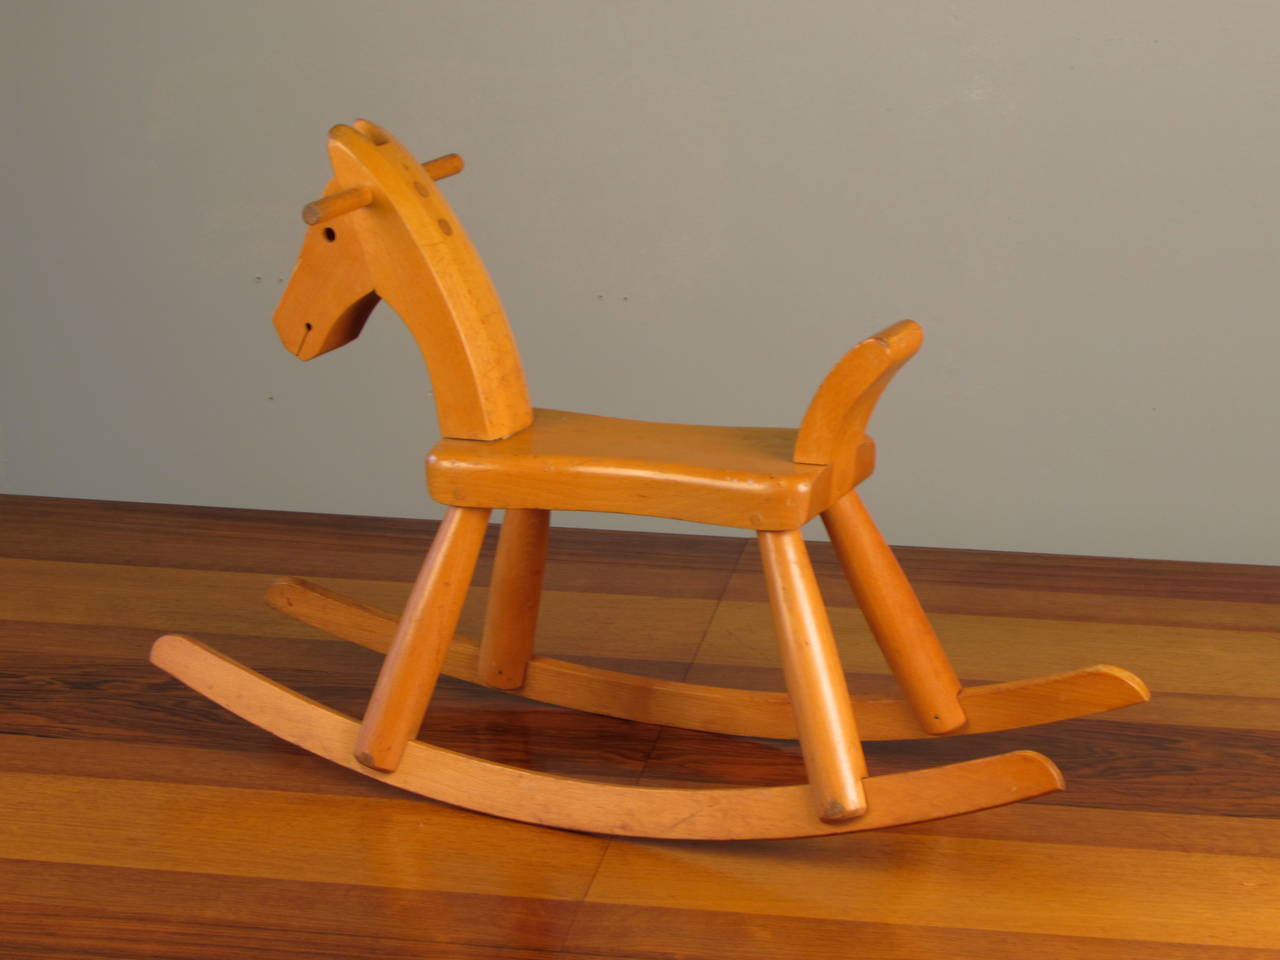 Fantastic and rare child's rocking horse by Kay Bojesen, Denmark, circa 1940. Carved from beechwood. This piece is in excellent vintage condition with minimal wear for age. The rounded legs are characteristic of an early version of this rocking